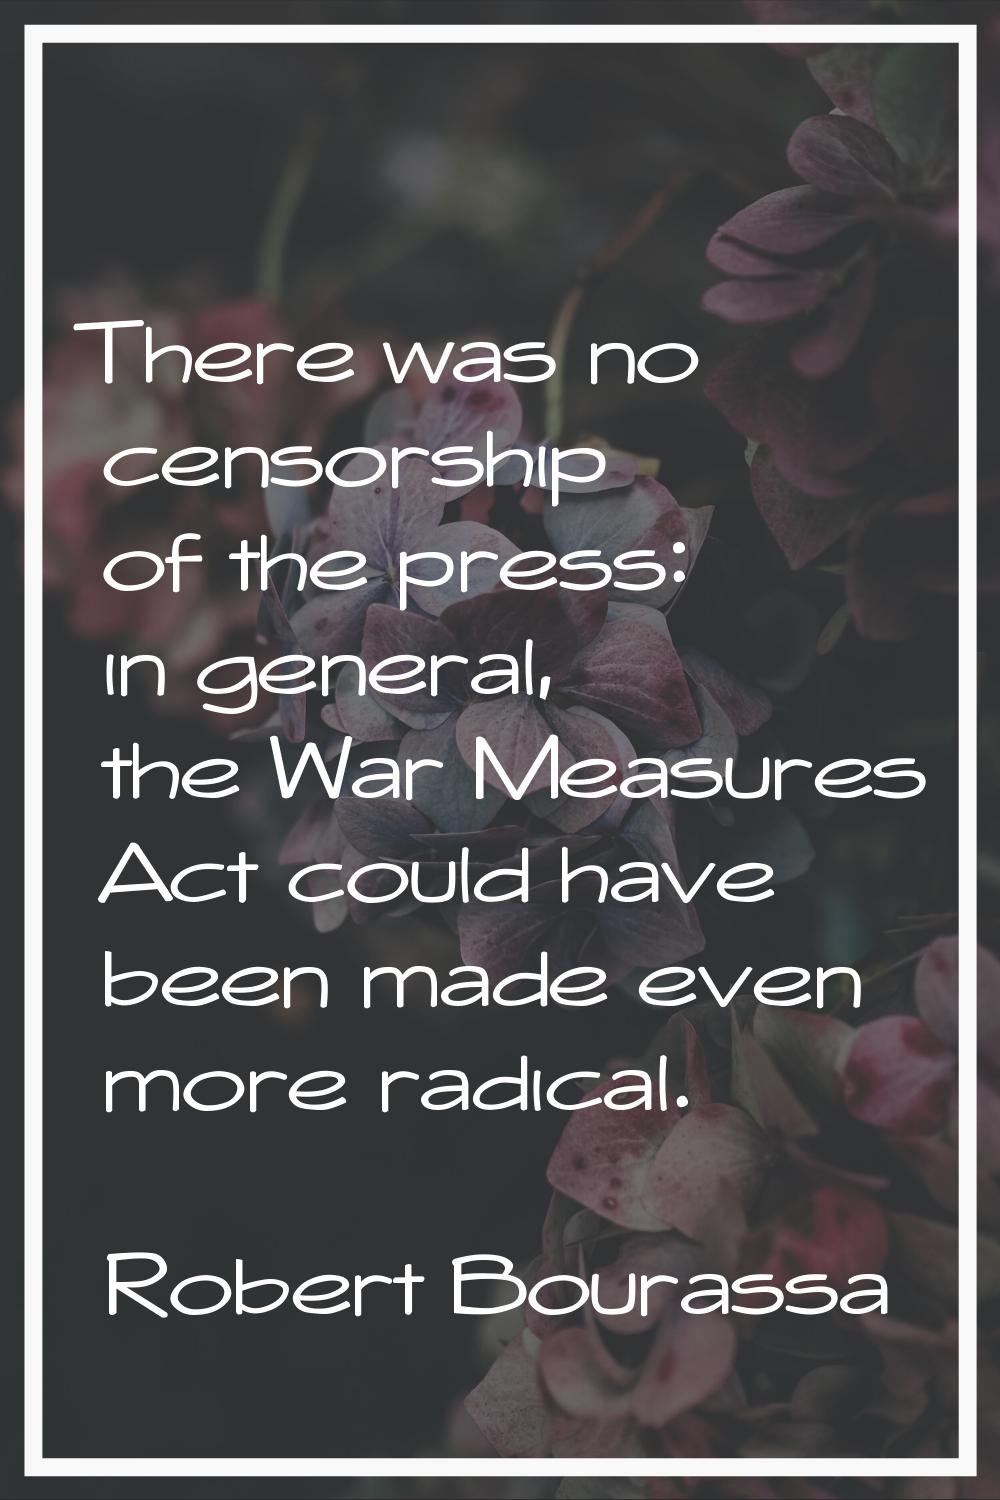 There was no censorship of the press: in general, the War Measures Act could have been made even mo